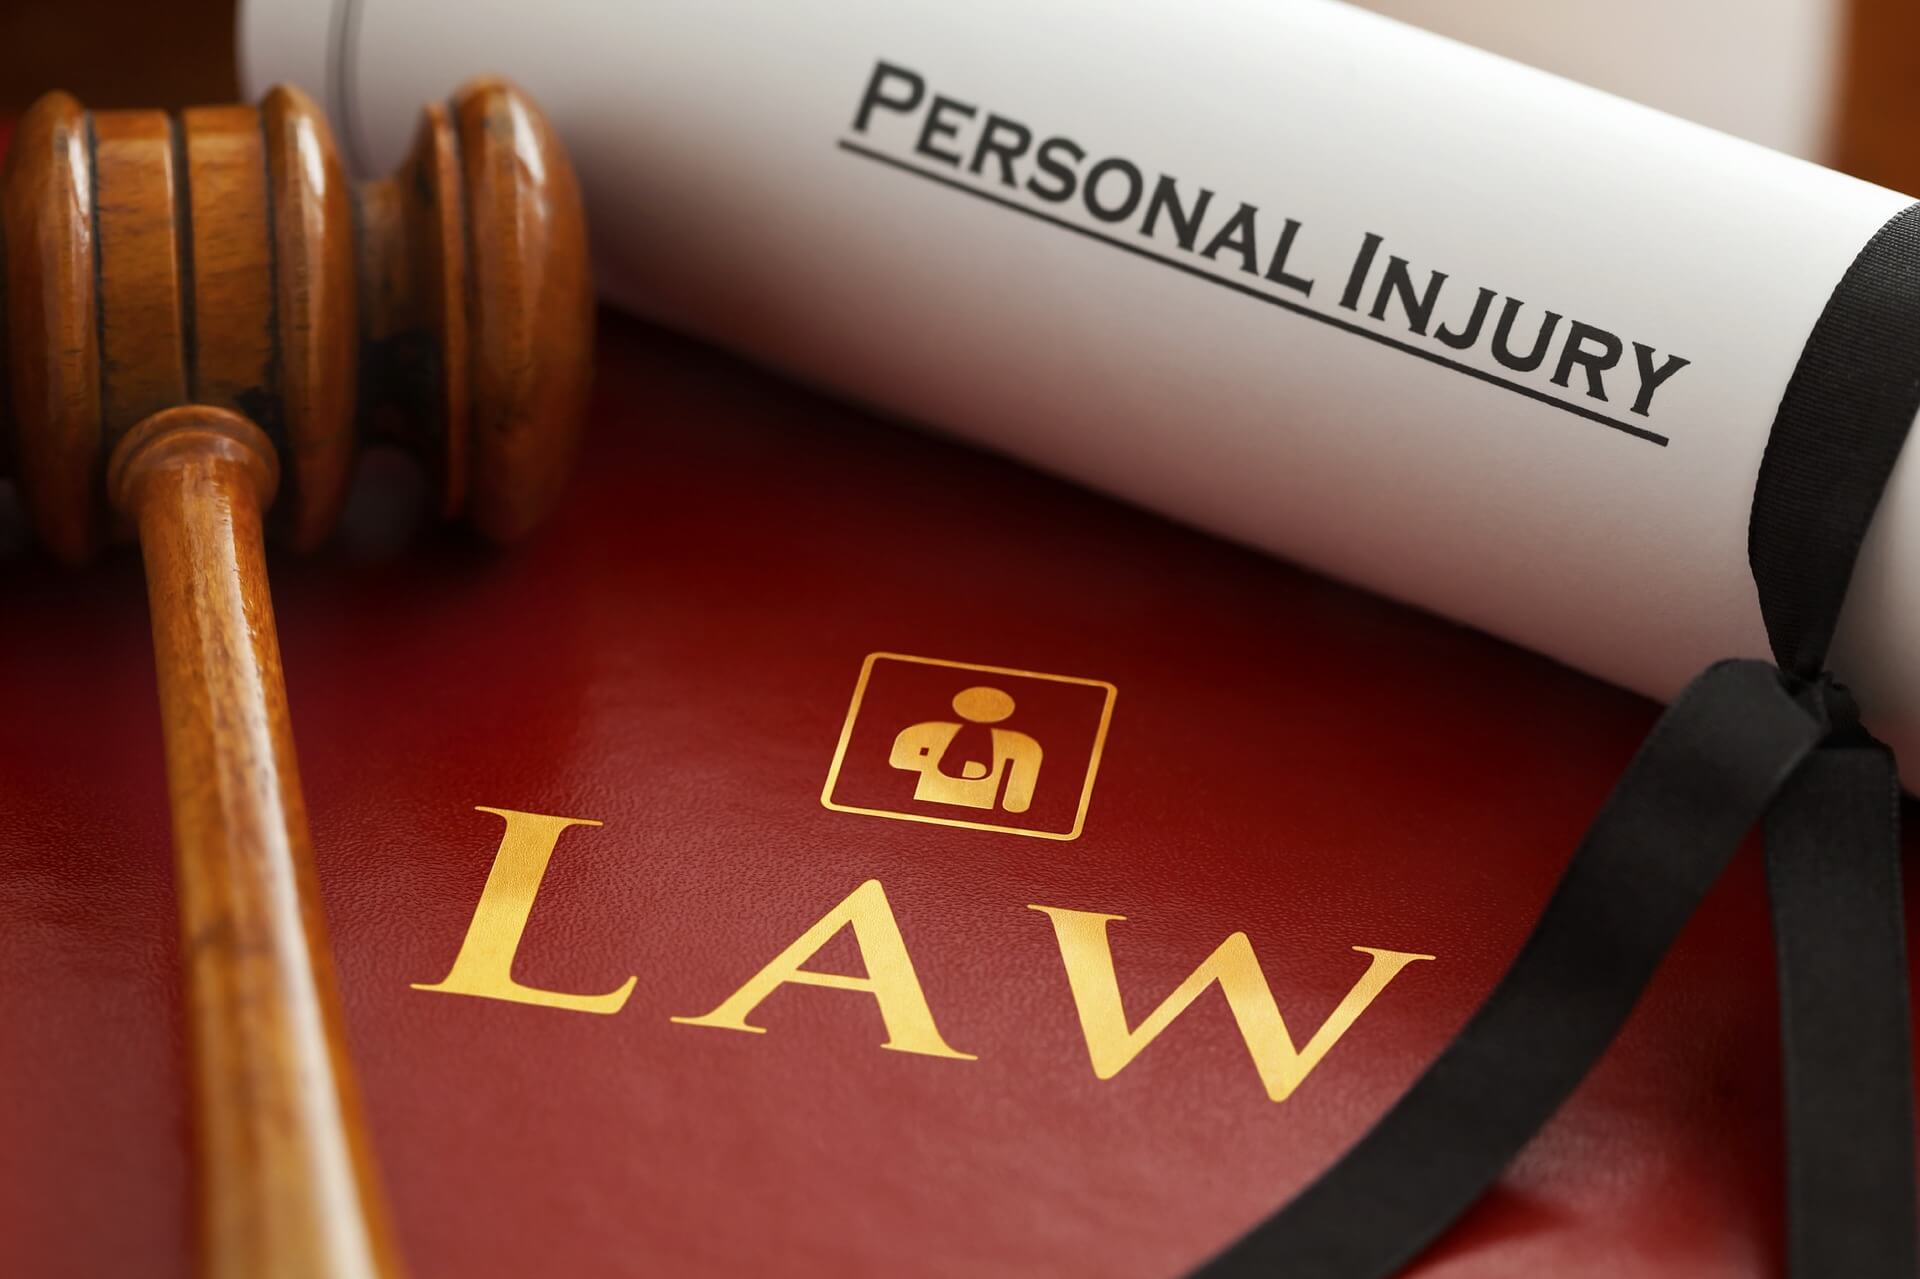 Personal Injury Lawyer in Los Angelez CZ.law (December 2021) Know The Complete Details!